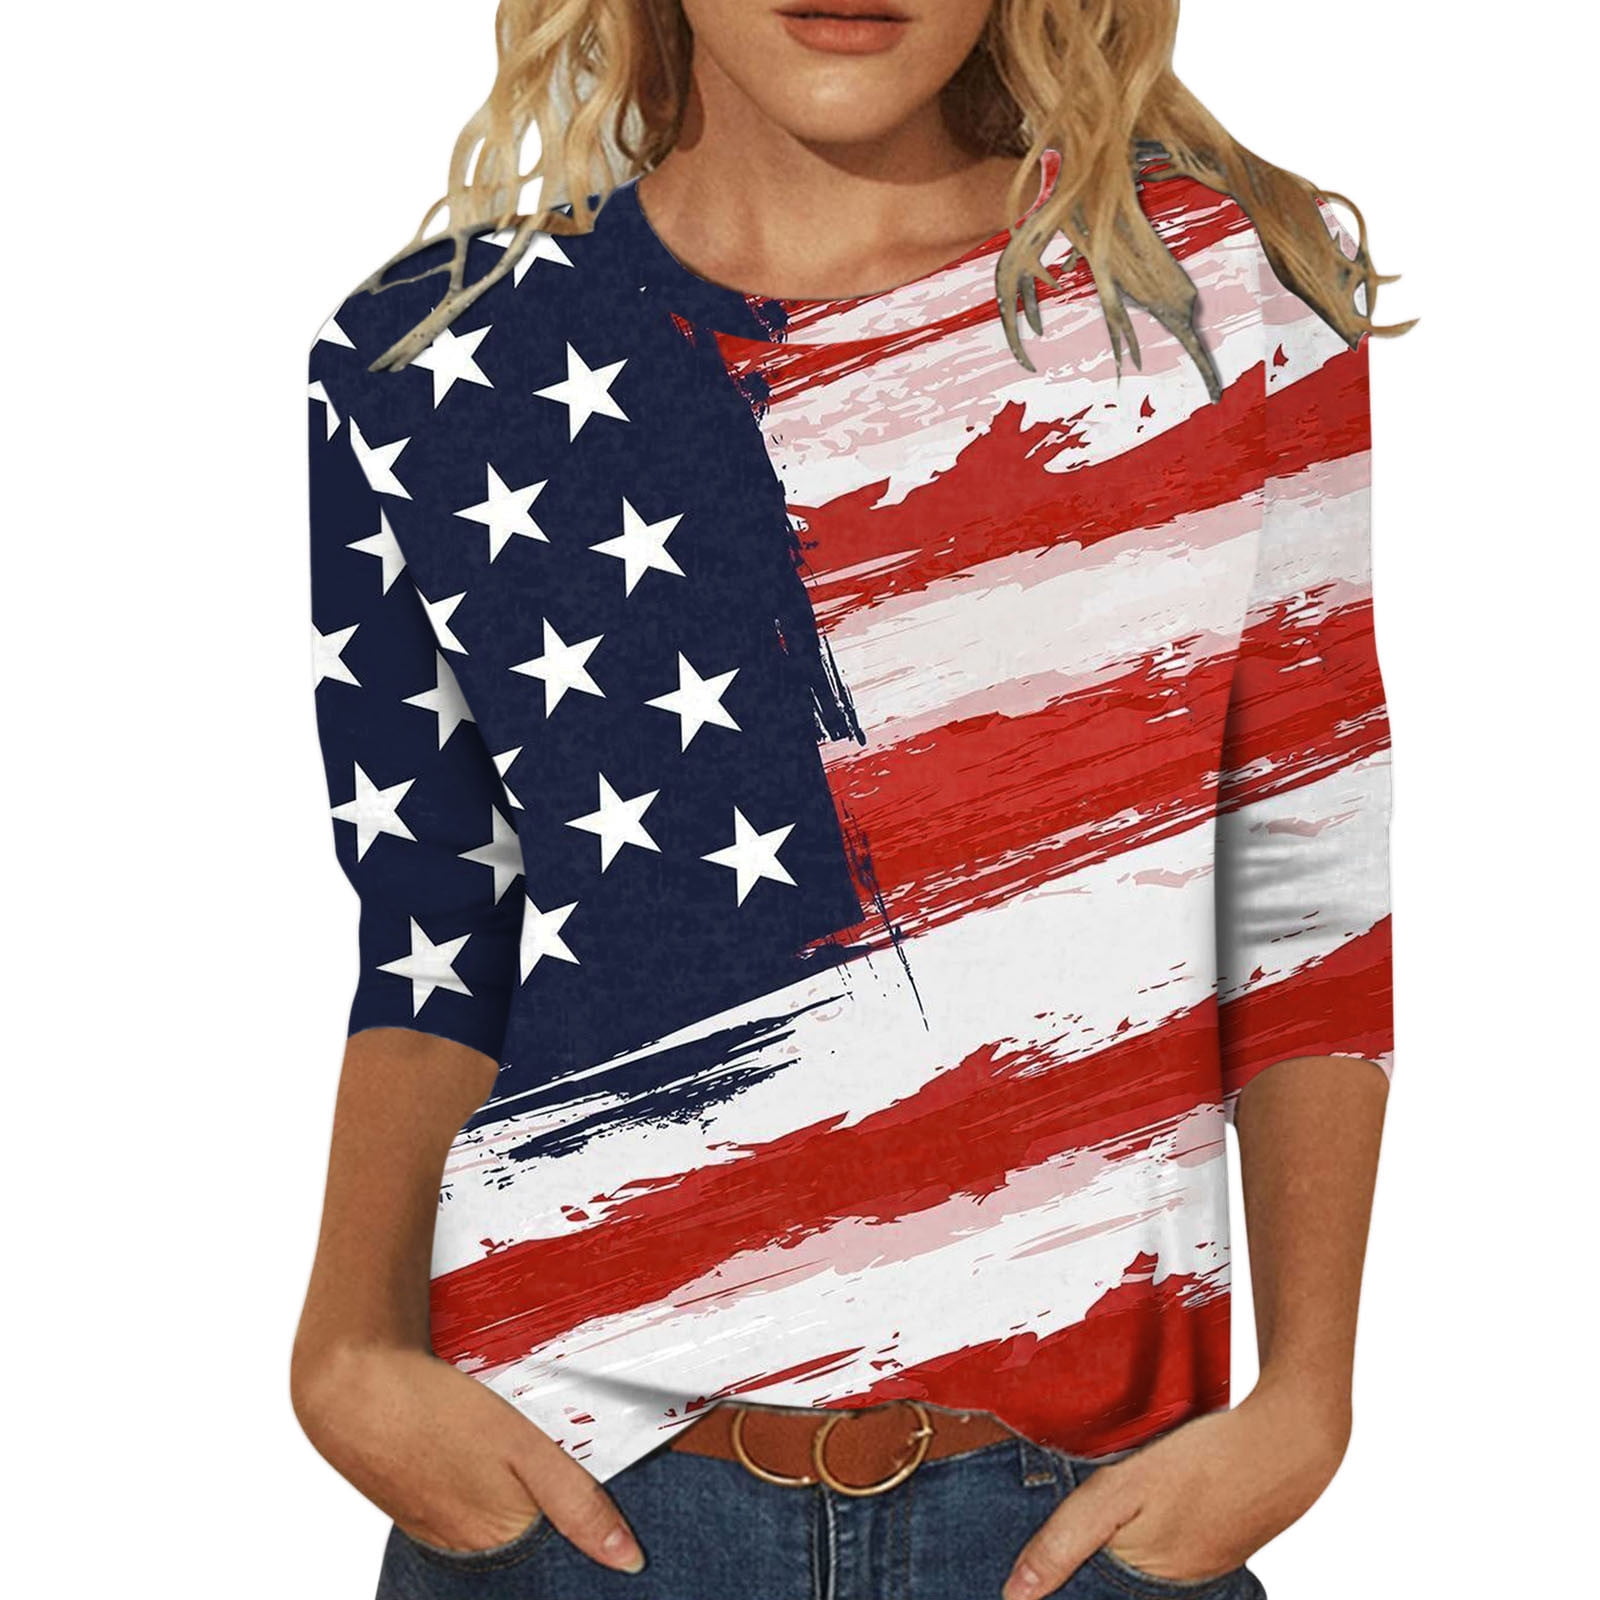 4th of July Tunic Tops for Women Summer 3/4 Sleeve Casual American Flag ...